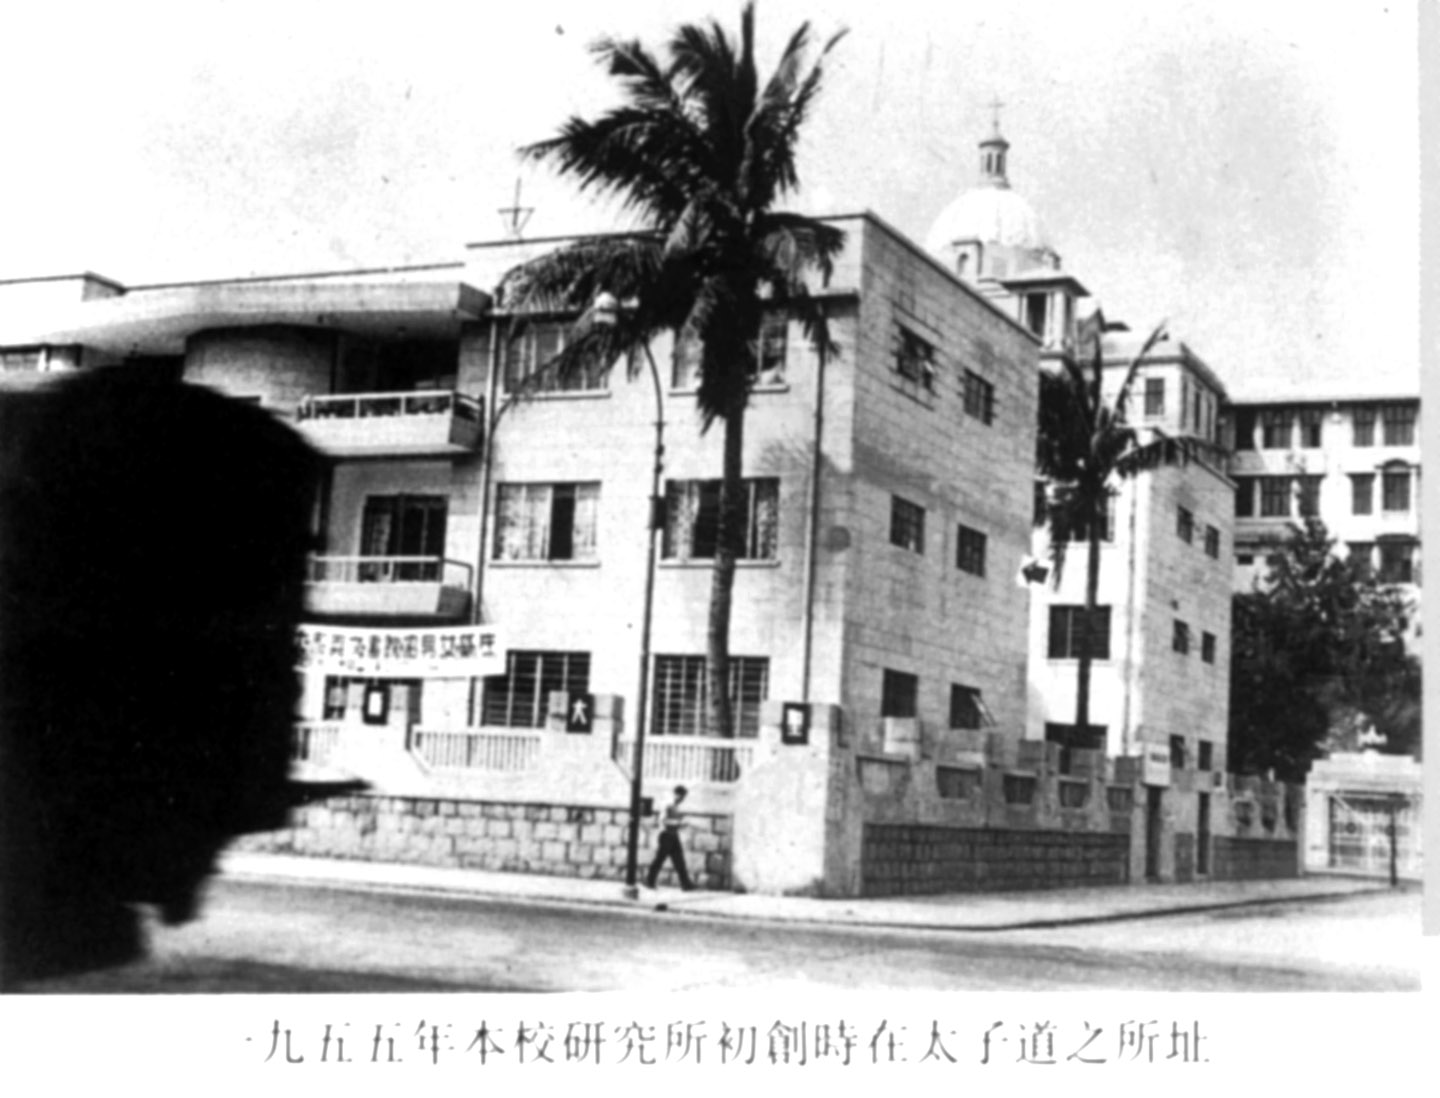 The New Asia Institute of Advanced Chinese Studies(1955)